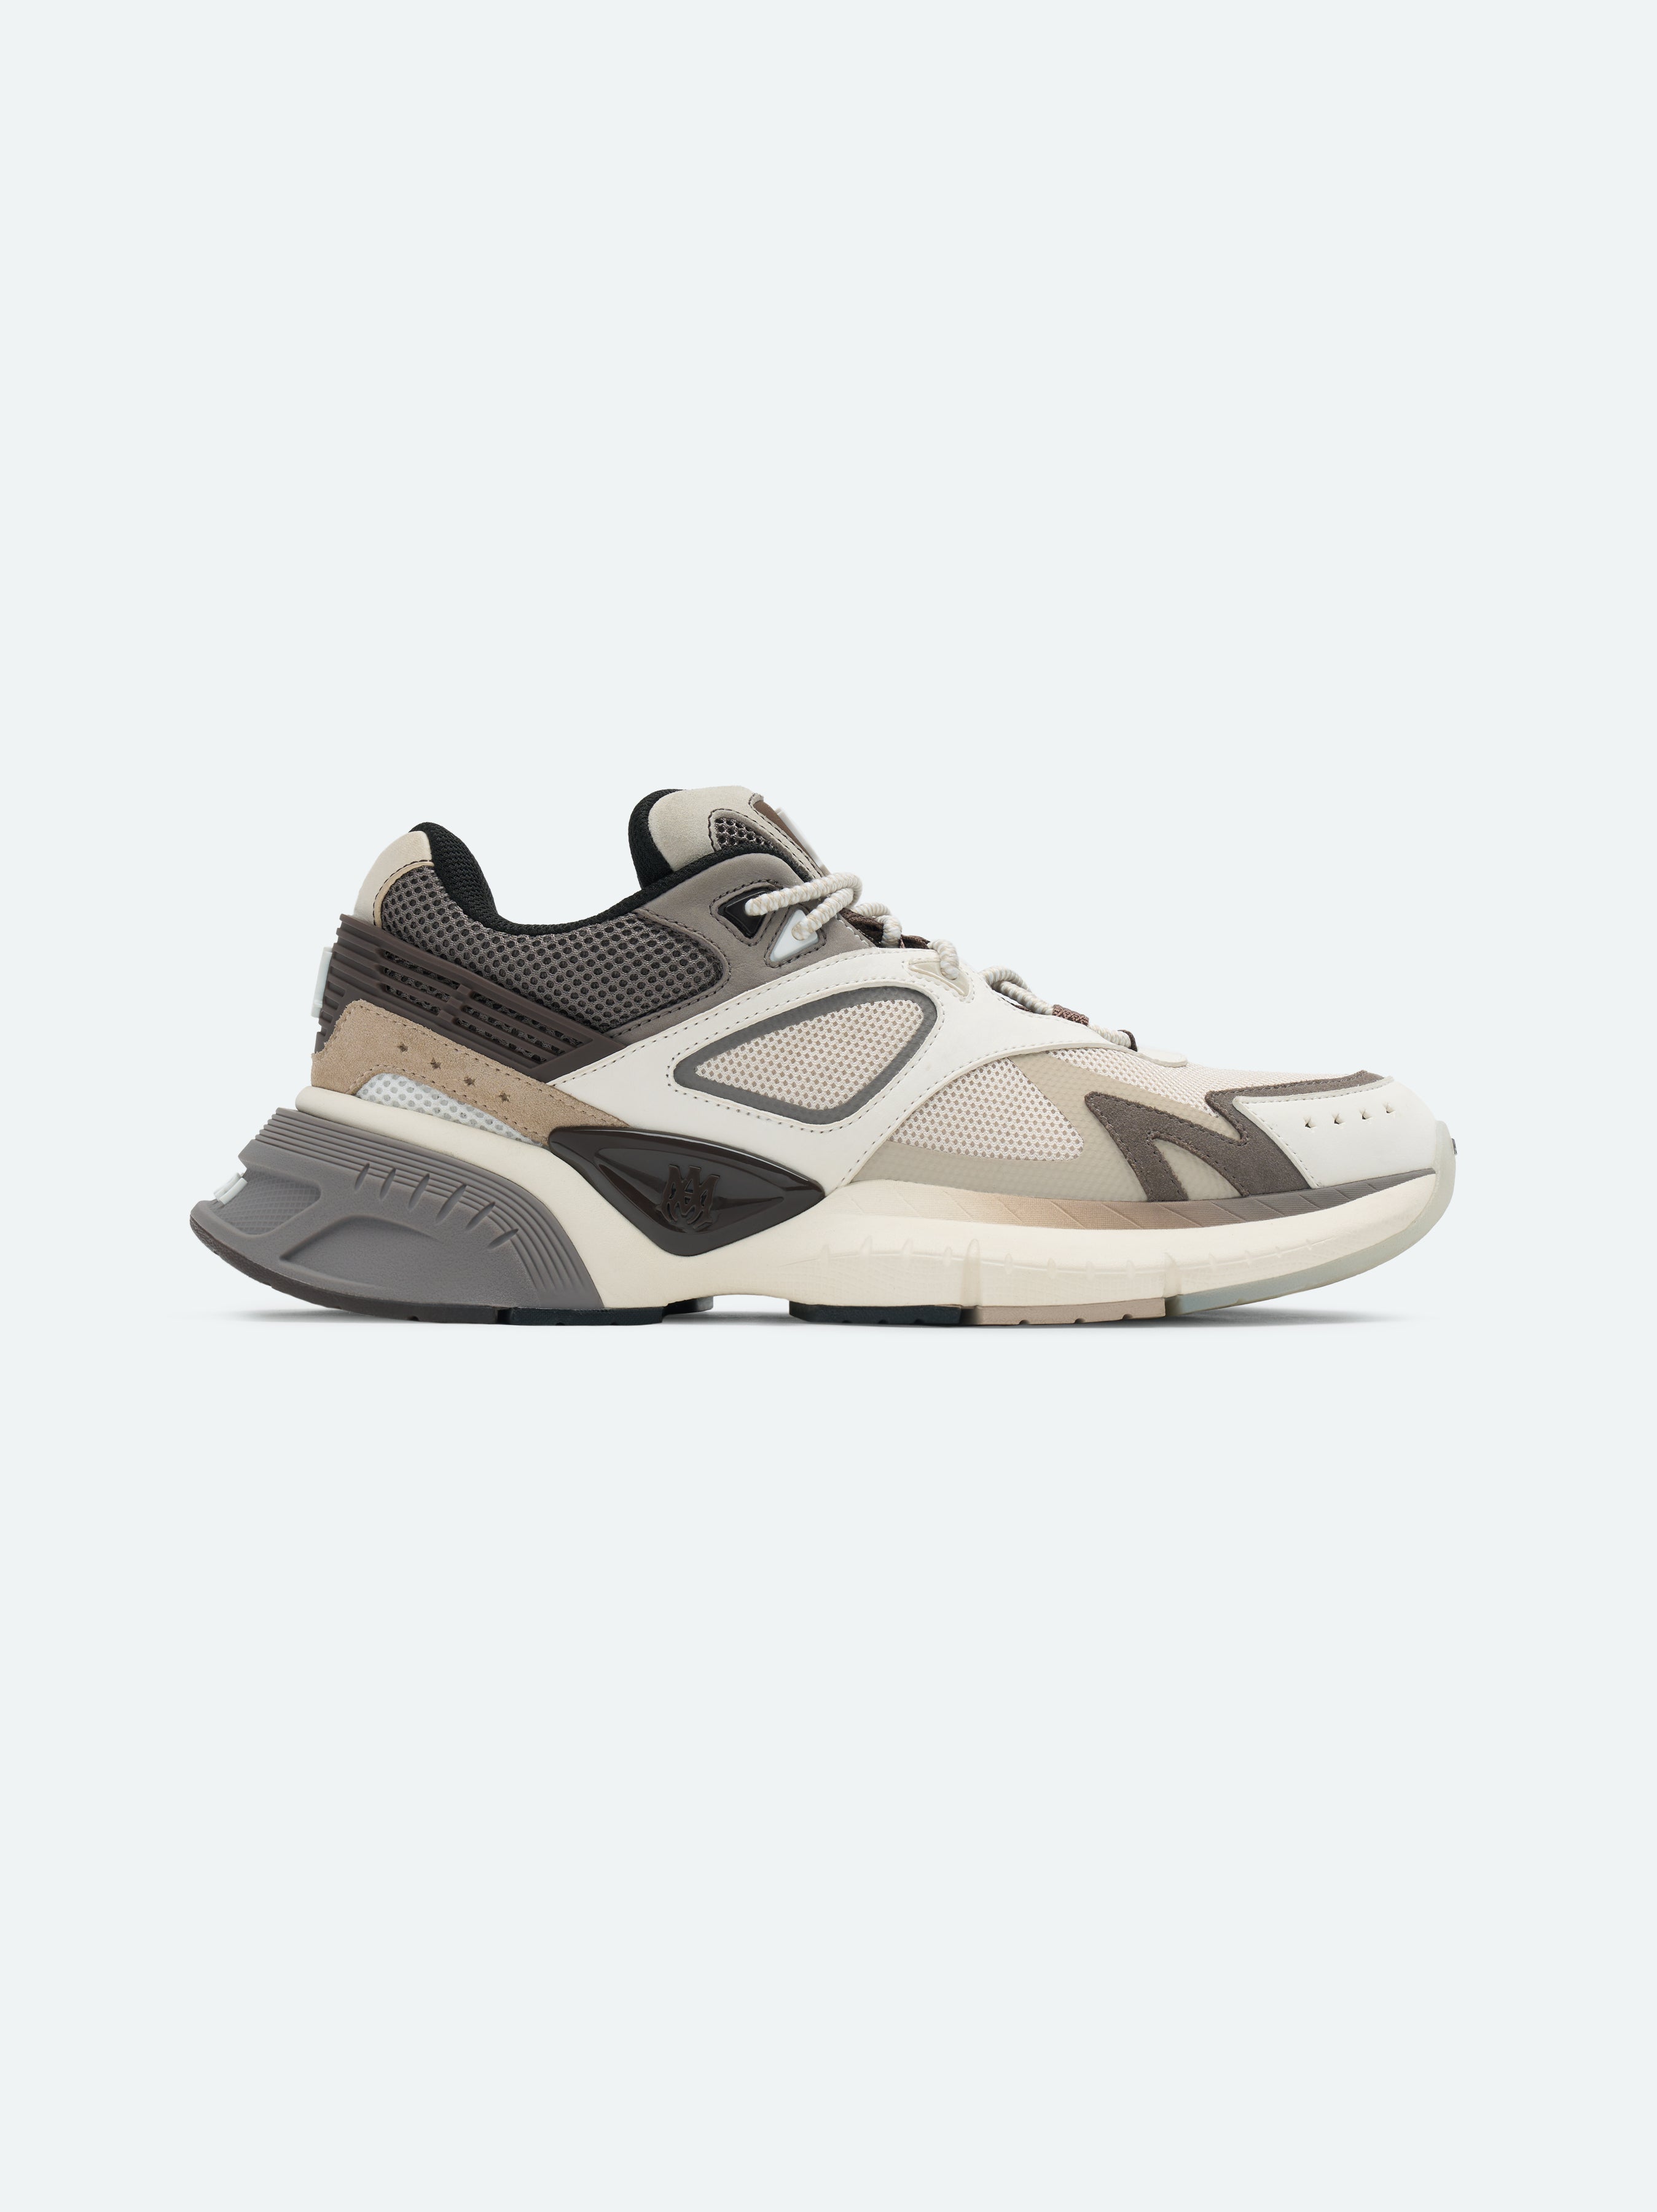 Product MA RUNNER - Brown featured image